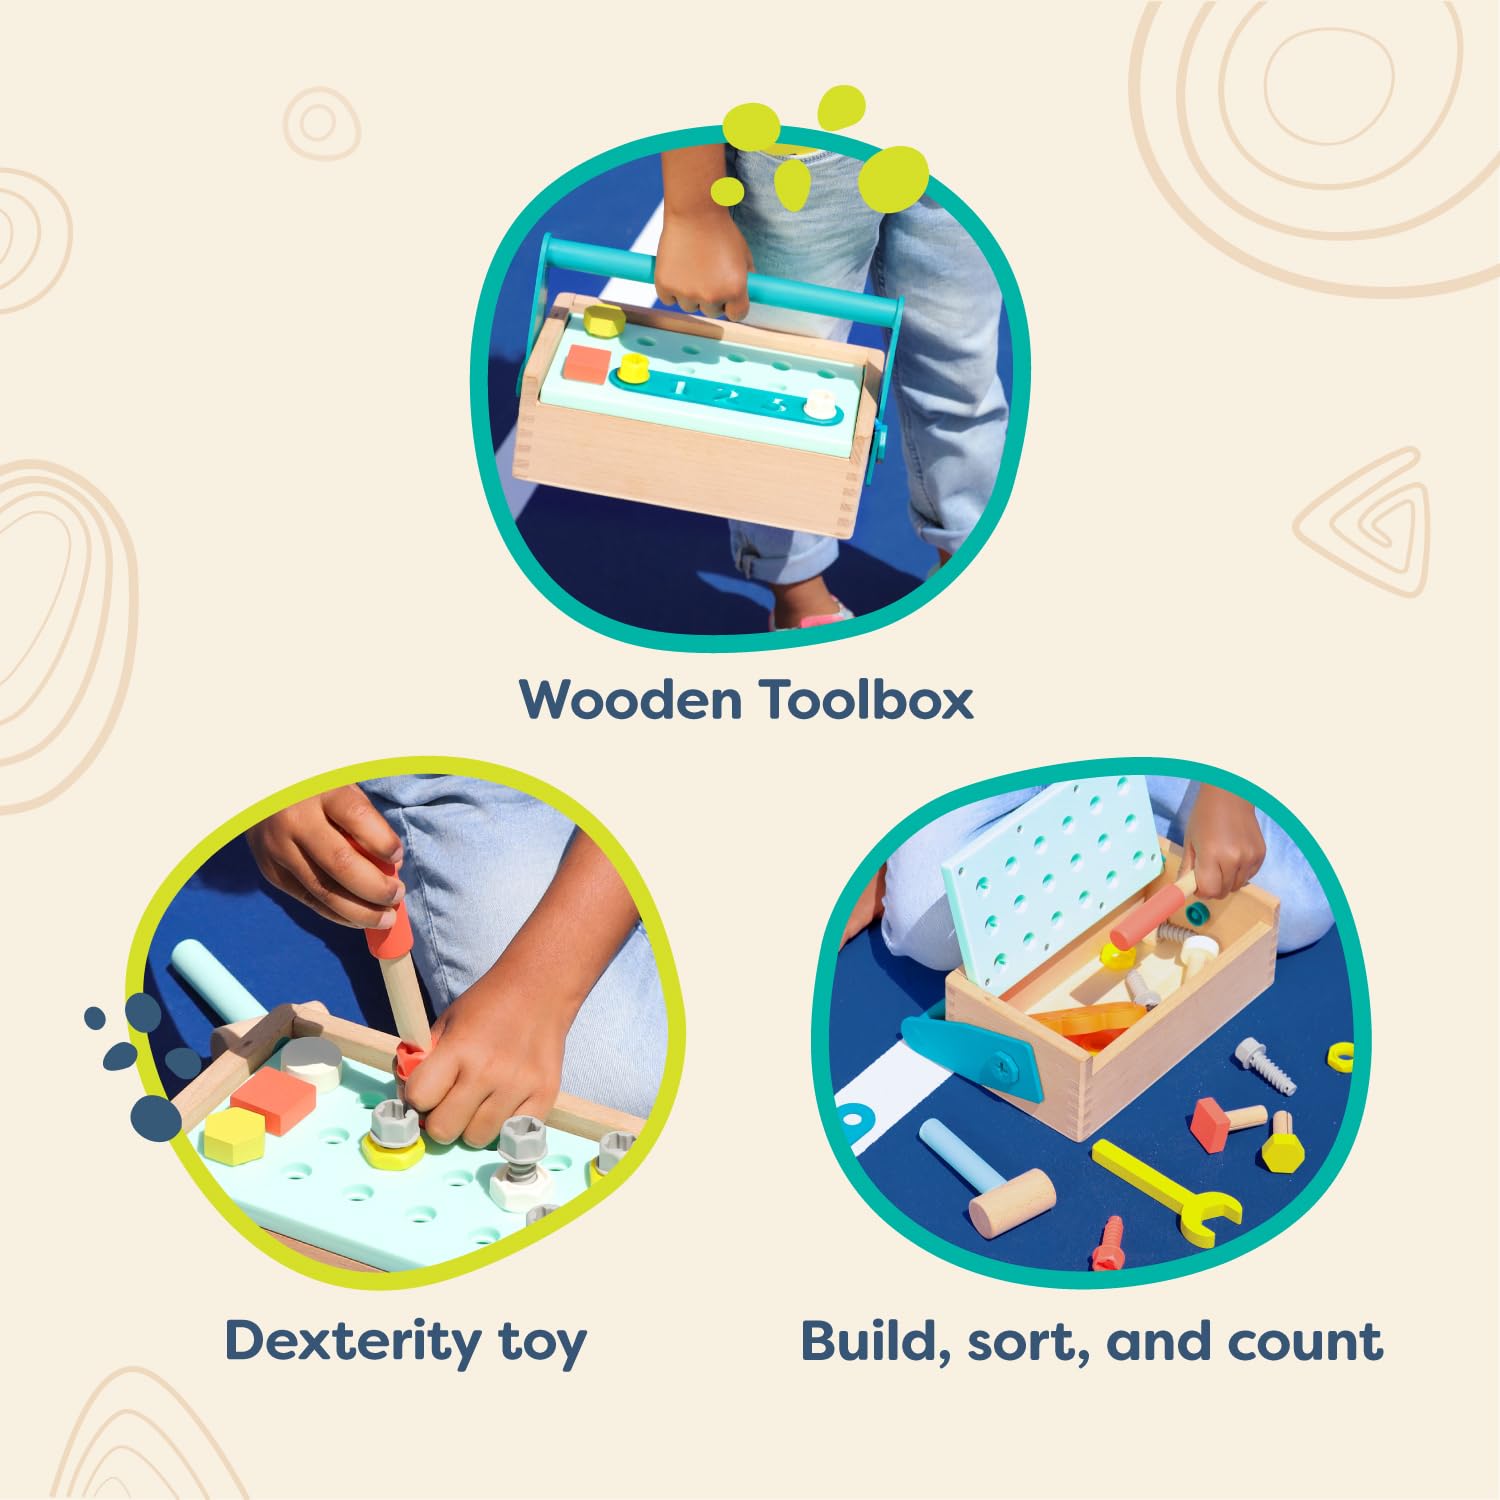 B. toys- Fix ‘n’ Play Kit- Pretend Play Tool Box – Wooden Toolbox & Accessories – Carpenter Set for Kids – Play Set with Drill, Hammer, Screwdriver & More – 3 Years +